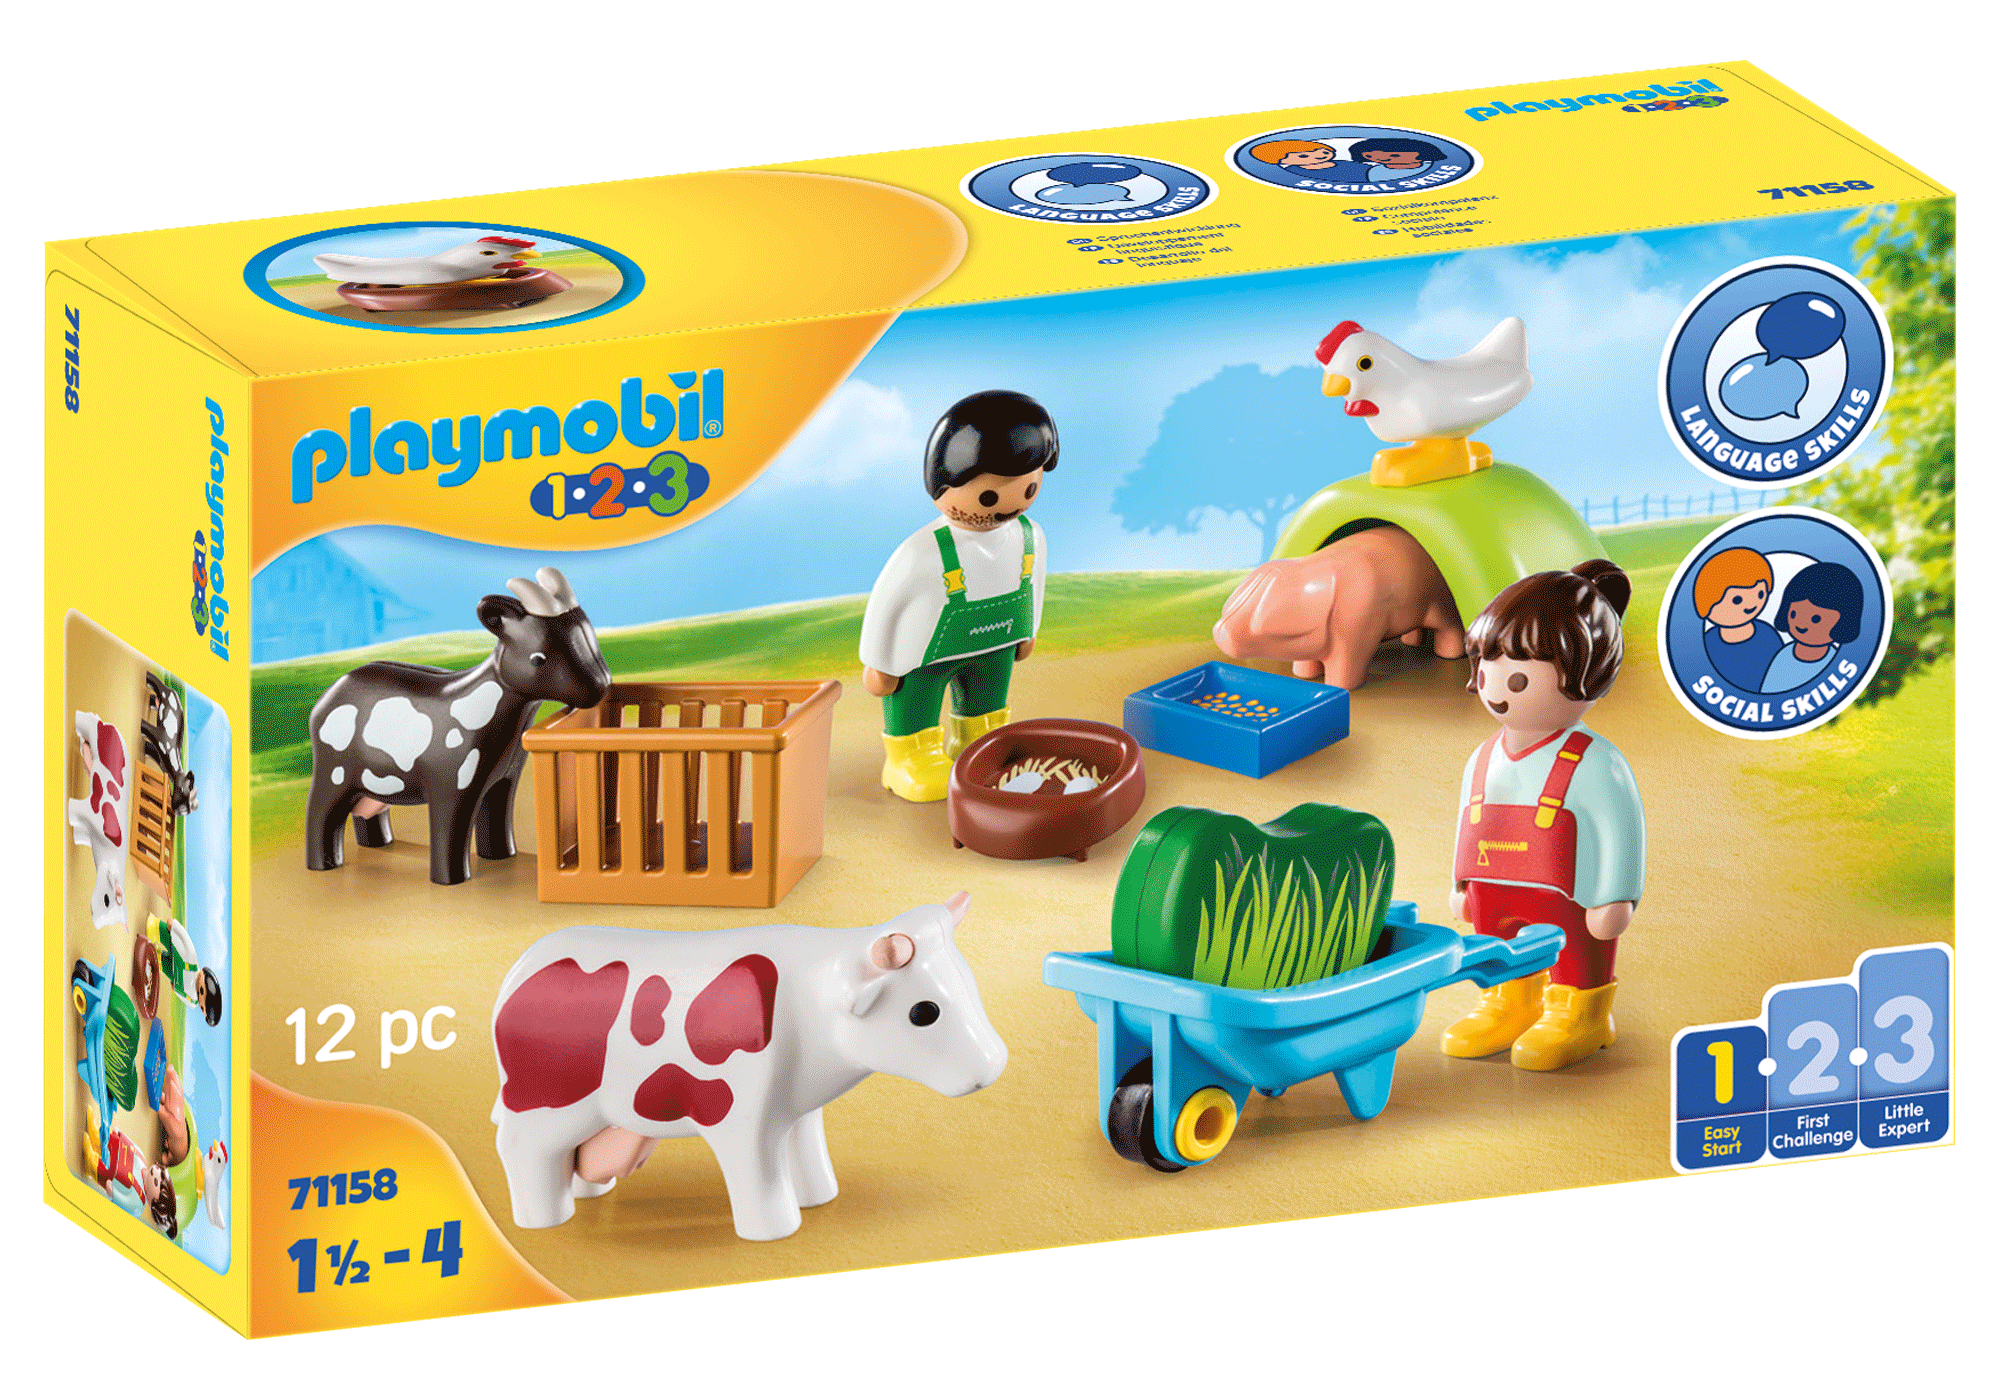 Playmobil 123 Fairy Friend with Fawn - A2Z Science & Learning Toy Store